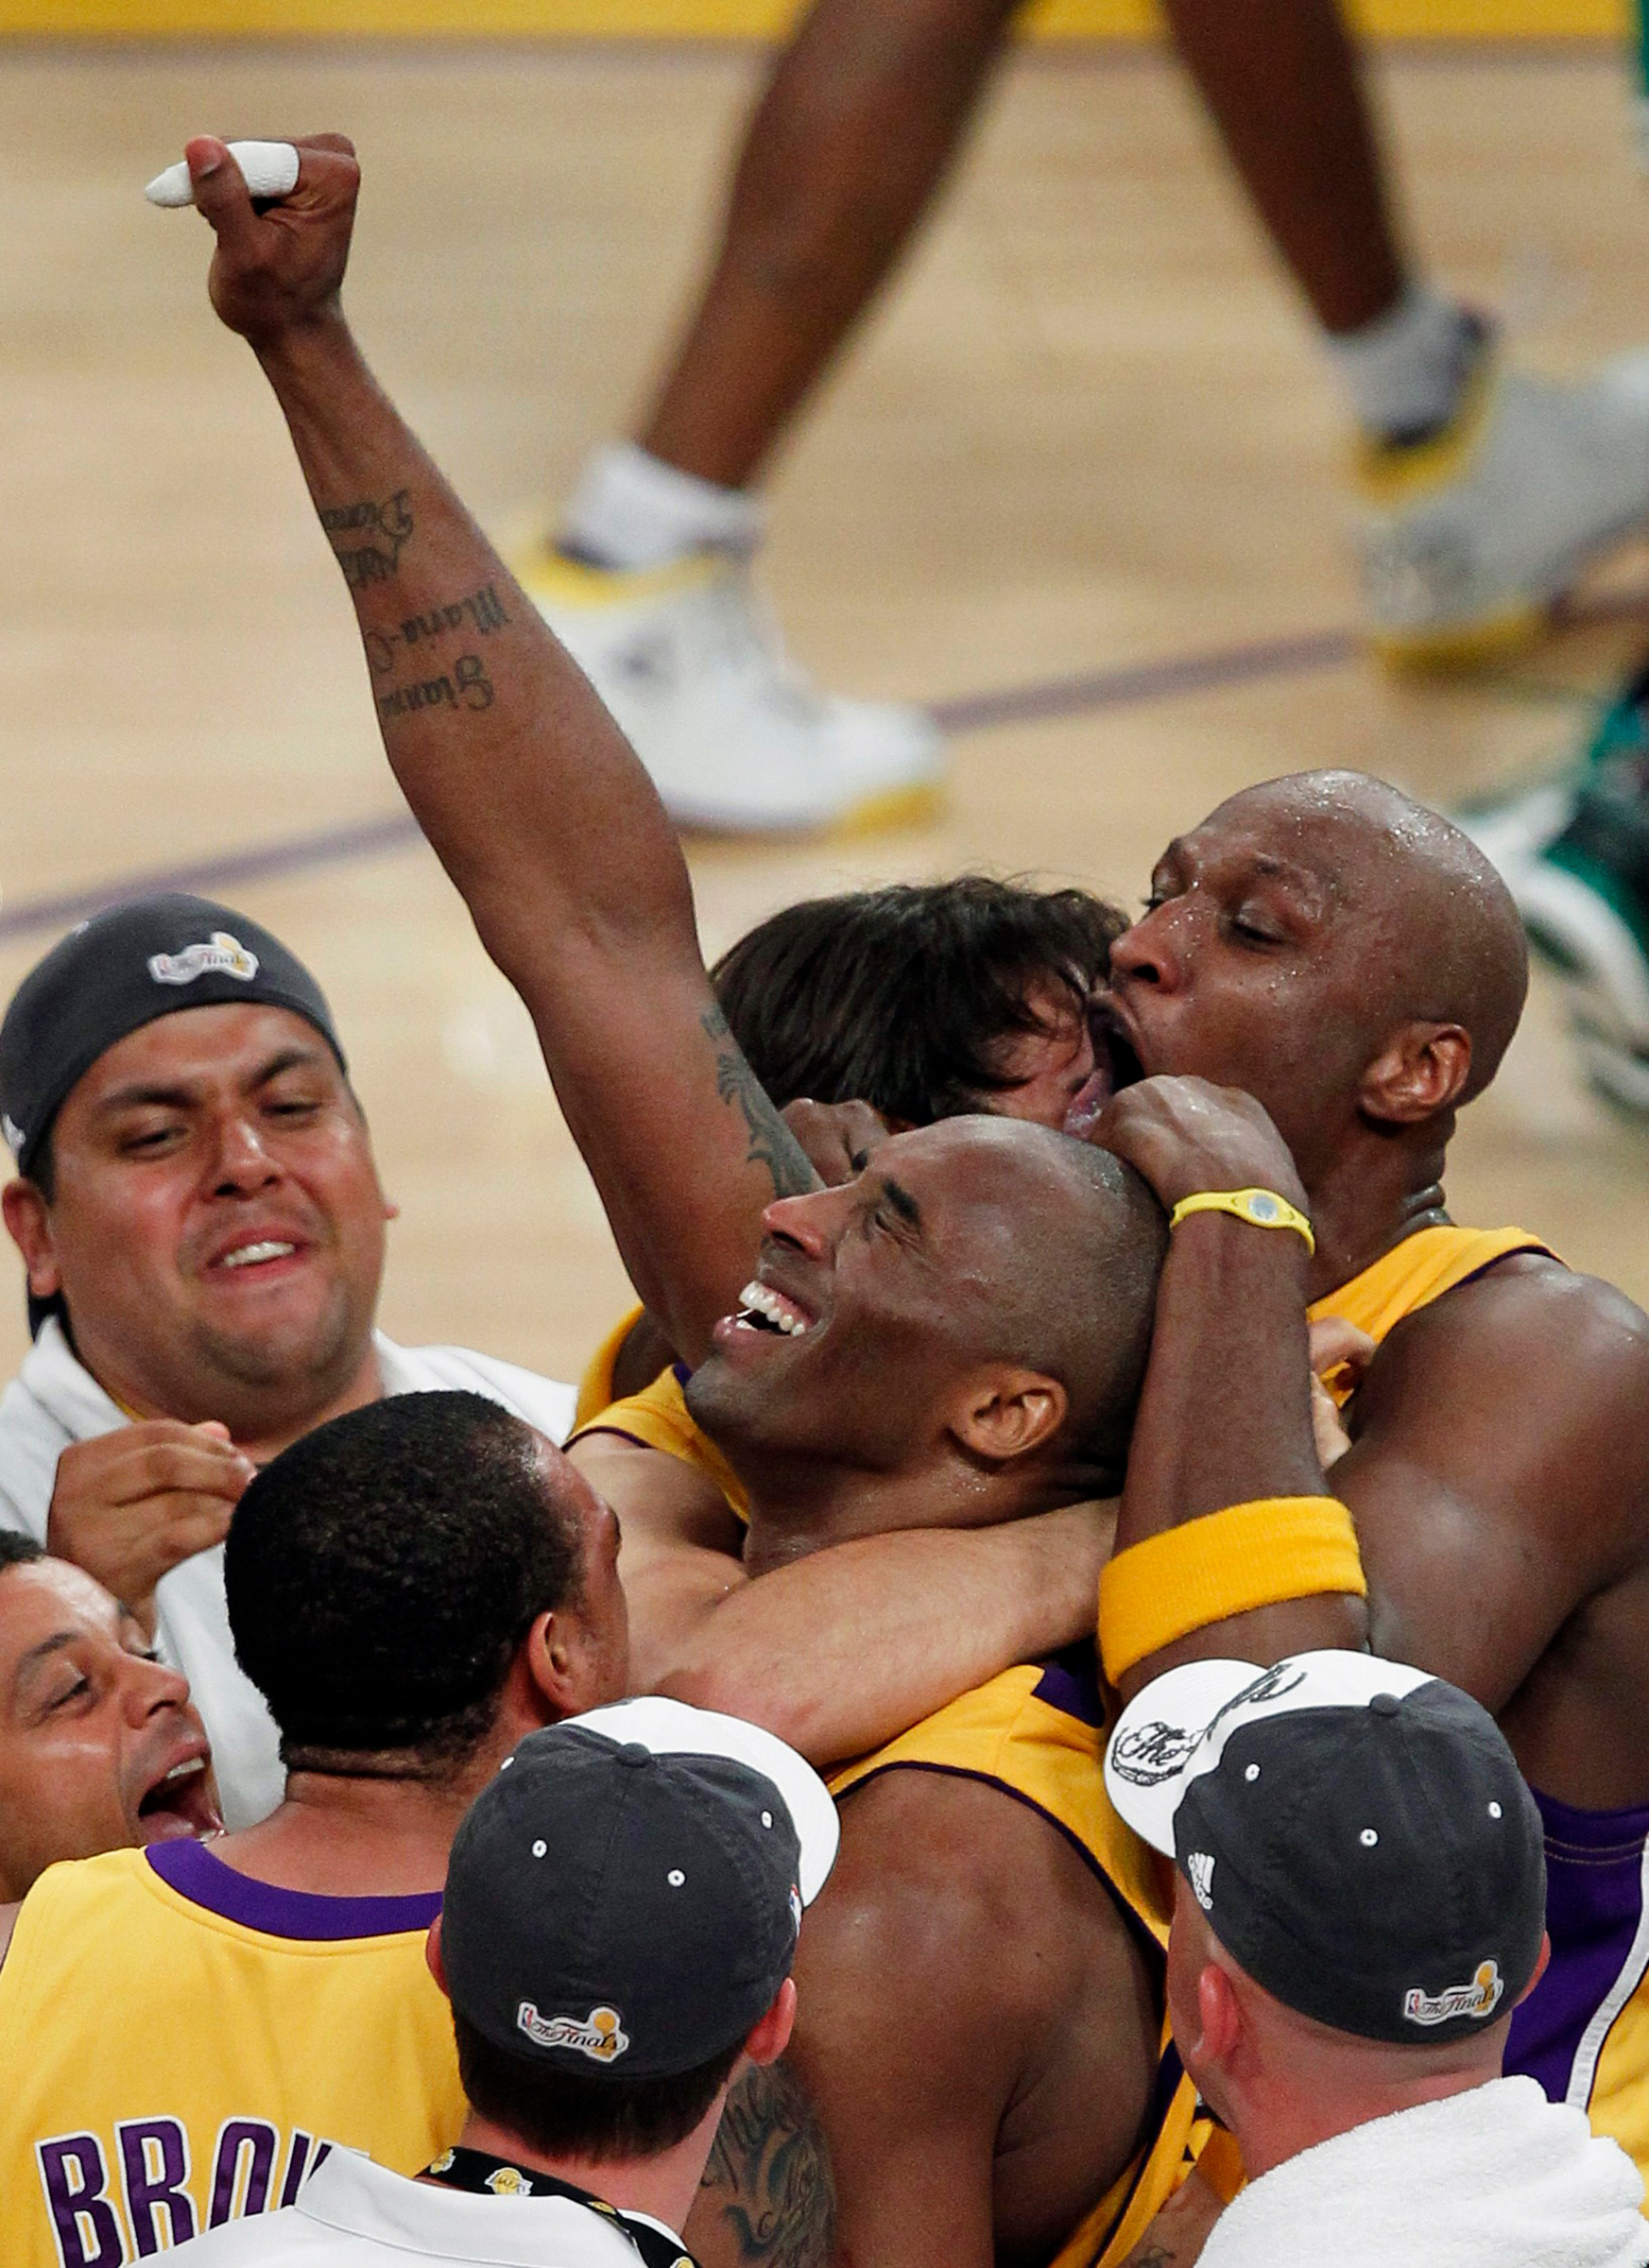 Bryant celebrates the 2010 NBA championship, after the Lakers defeated the Boston Celtics in Game 7